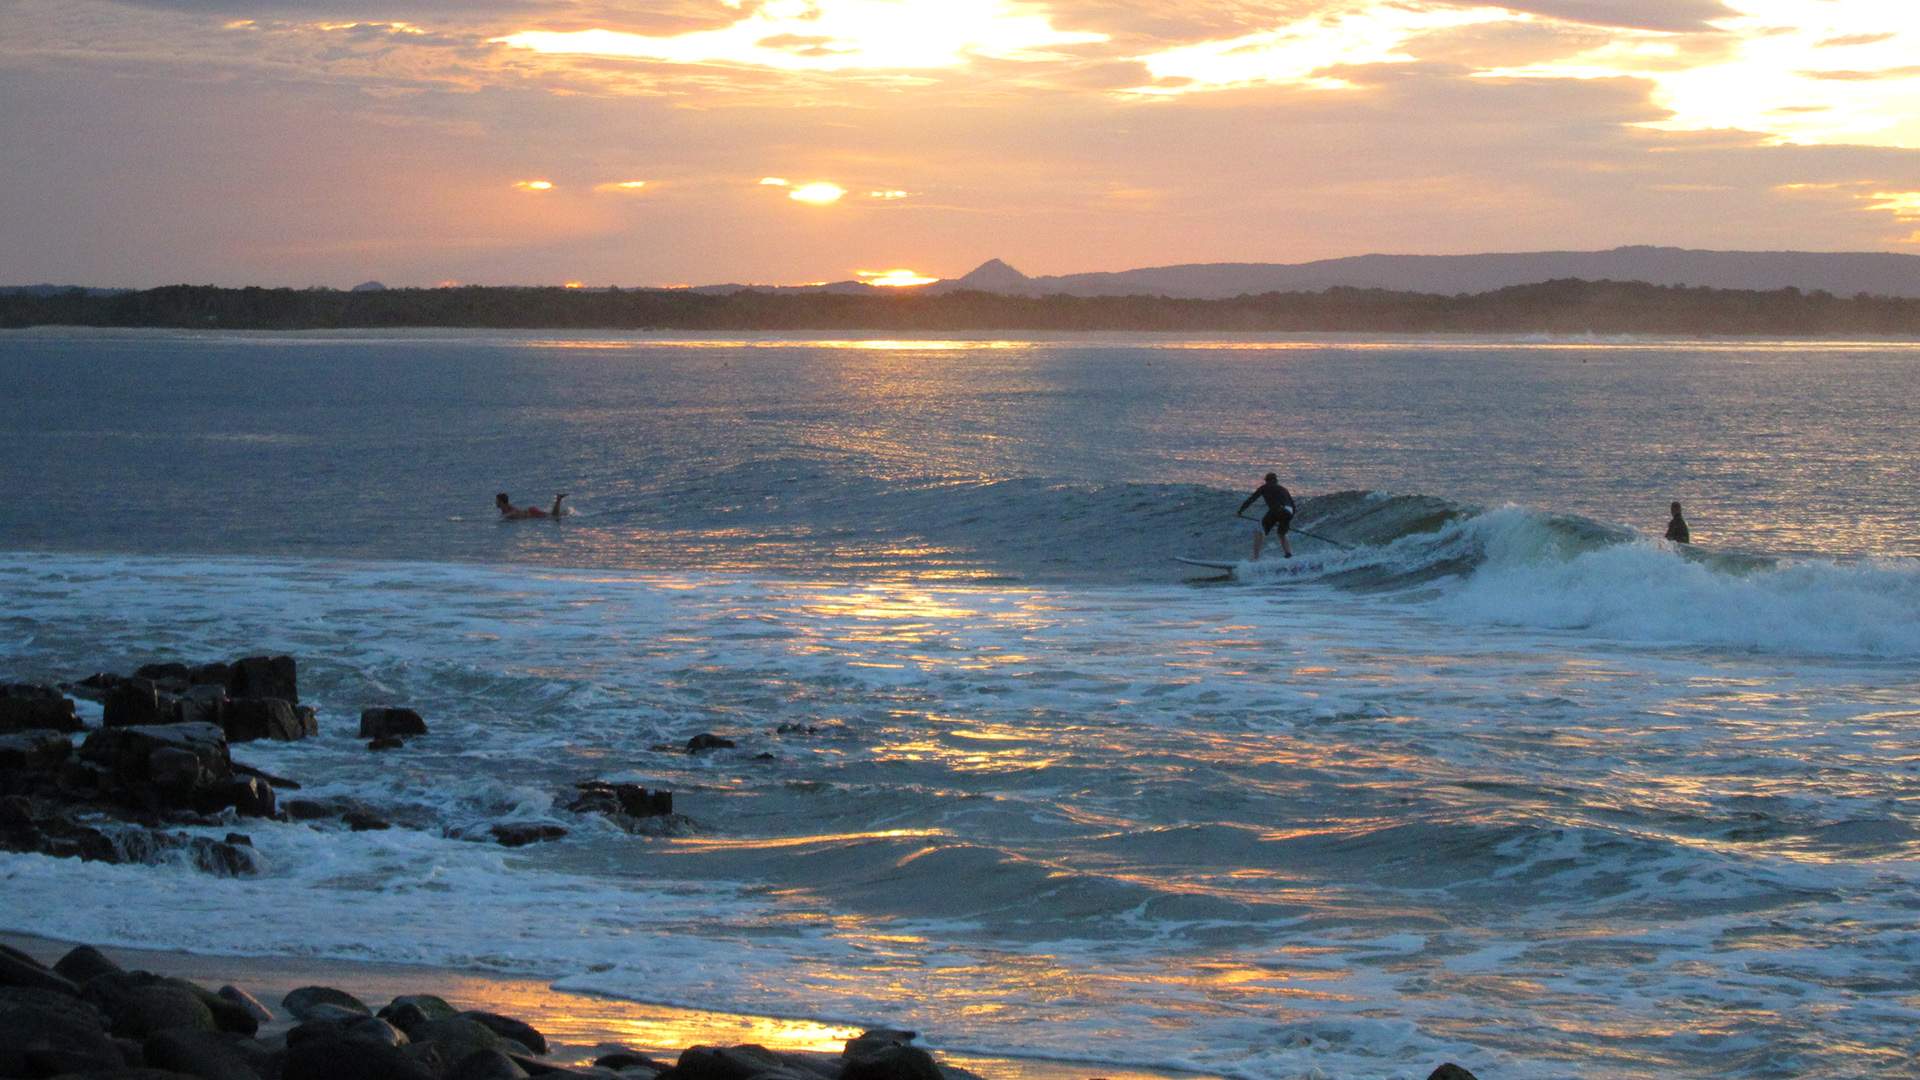 A Stretch of Noosa's Coastline Has Been Declared a World Surfing Reserve